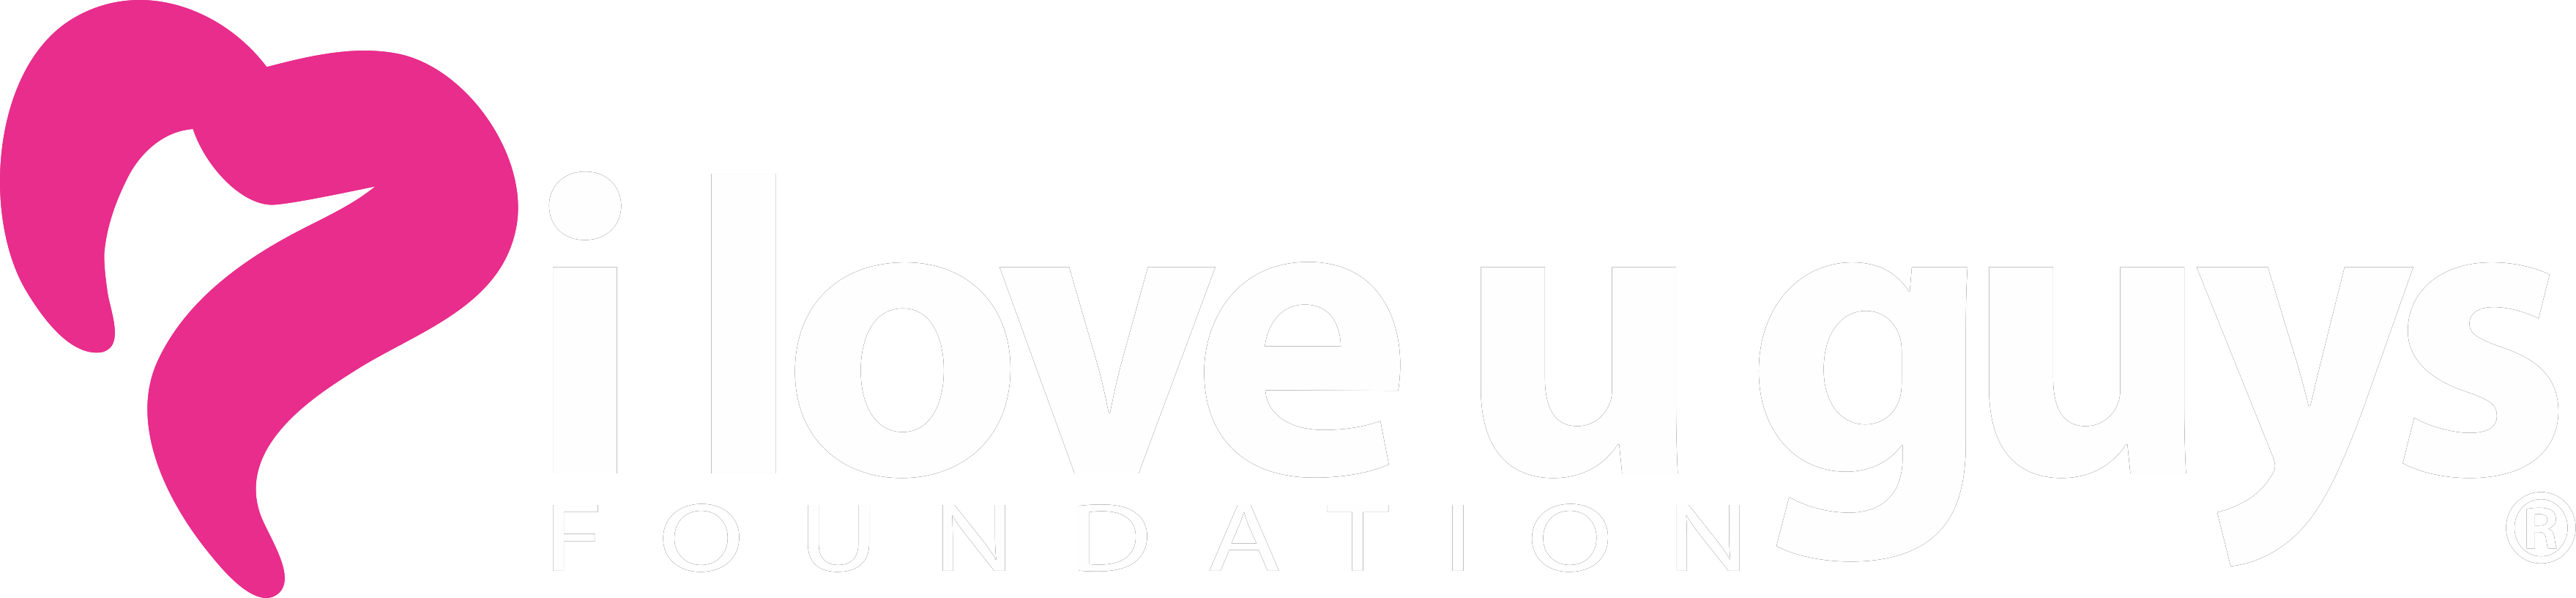 Love You Logo - ♥ The I Love U Guys Foundation and Icon